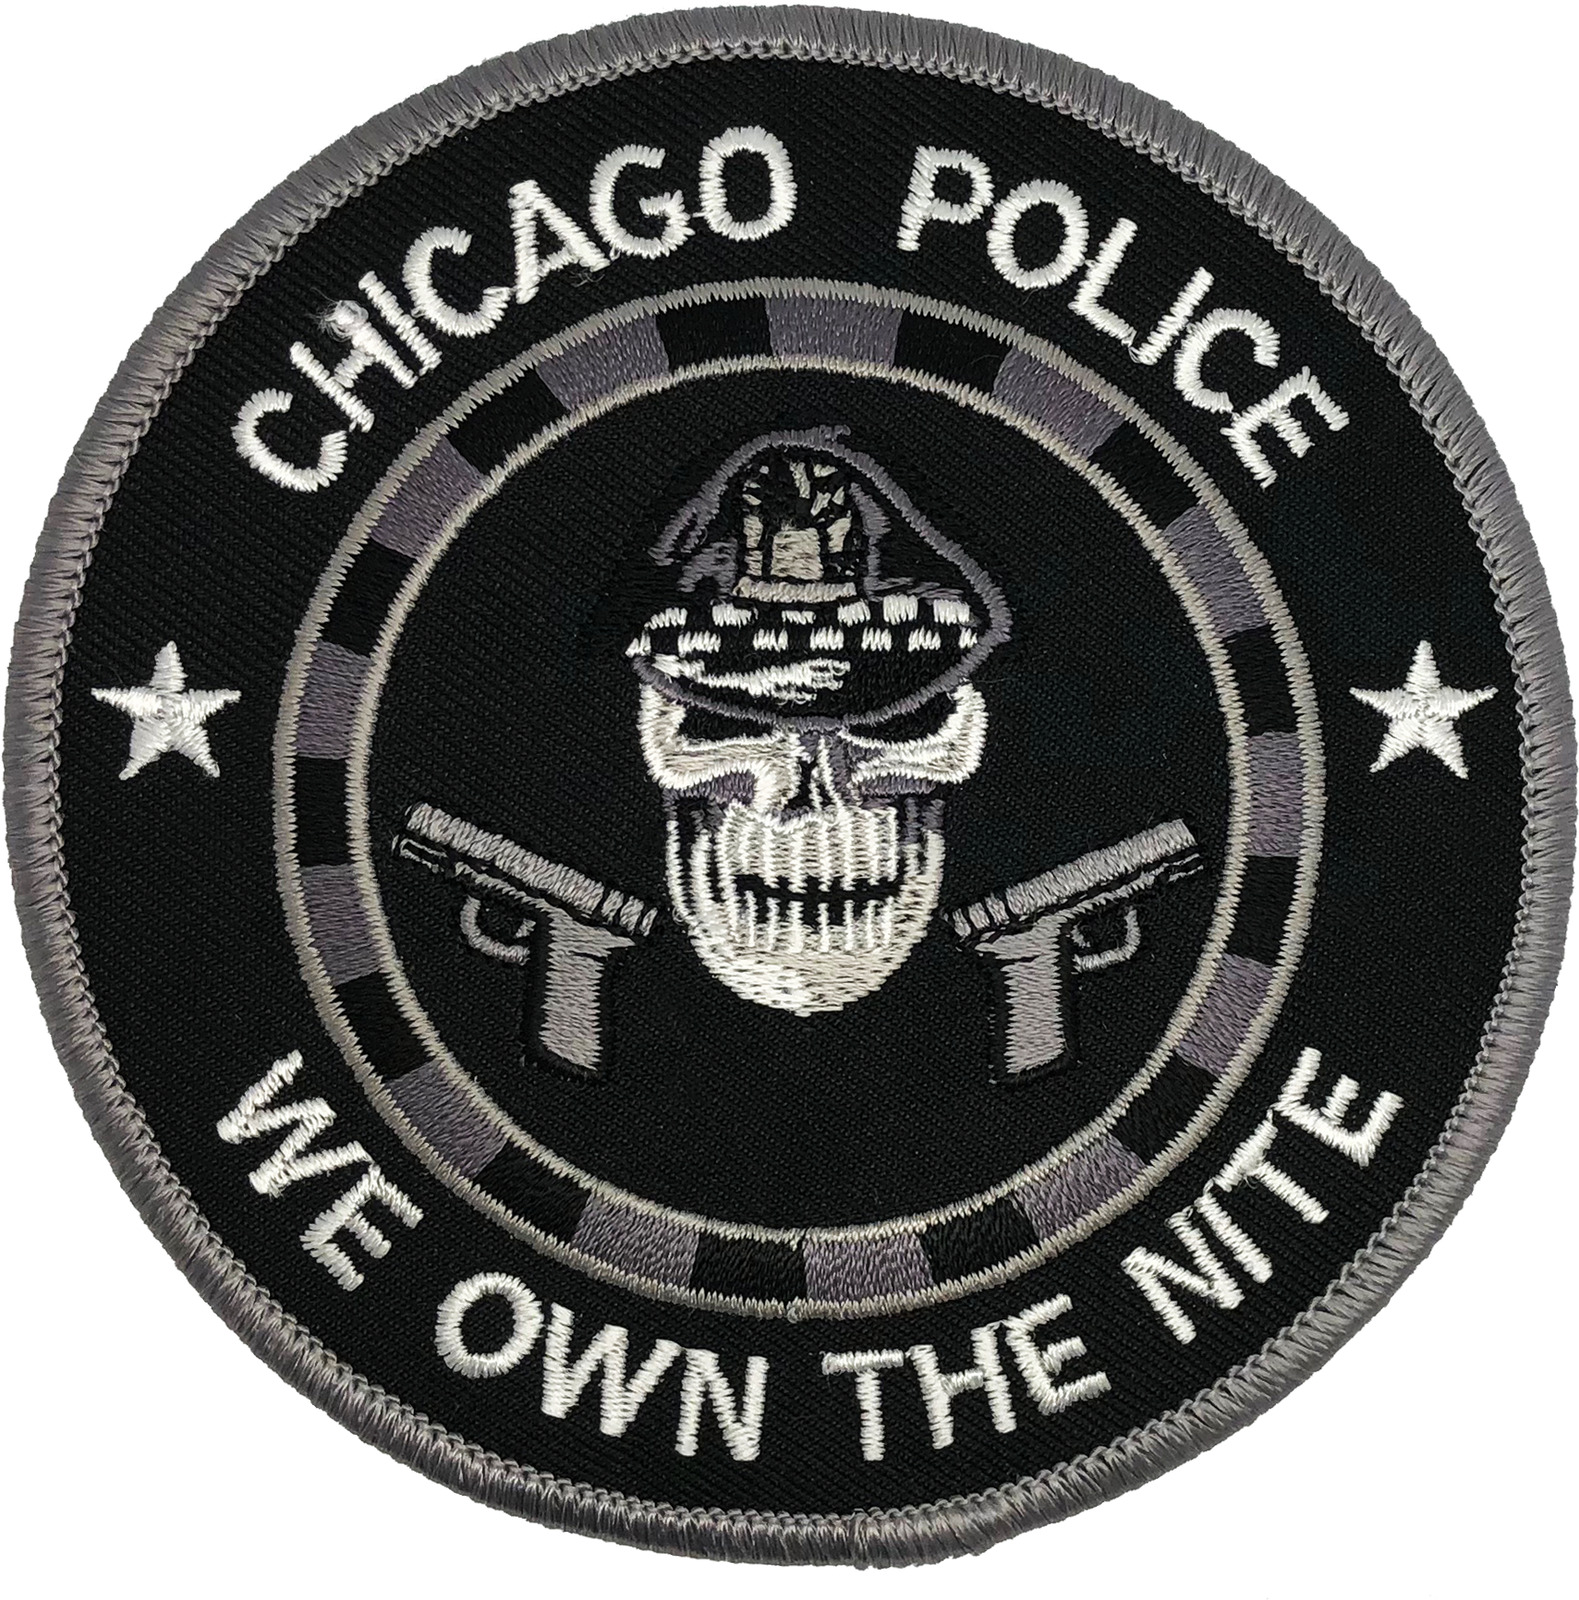 CHICAGO POLICE WE OWN THE NITE BIKER PATCH